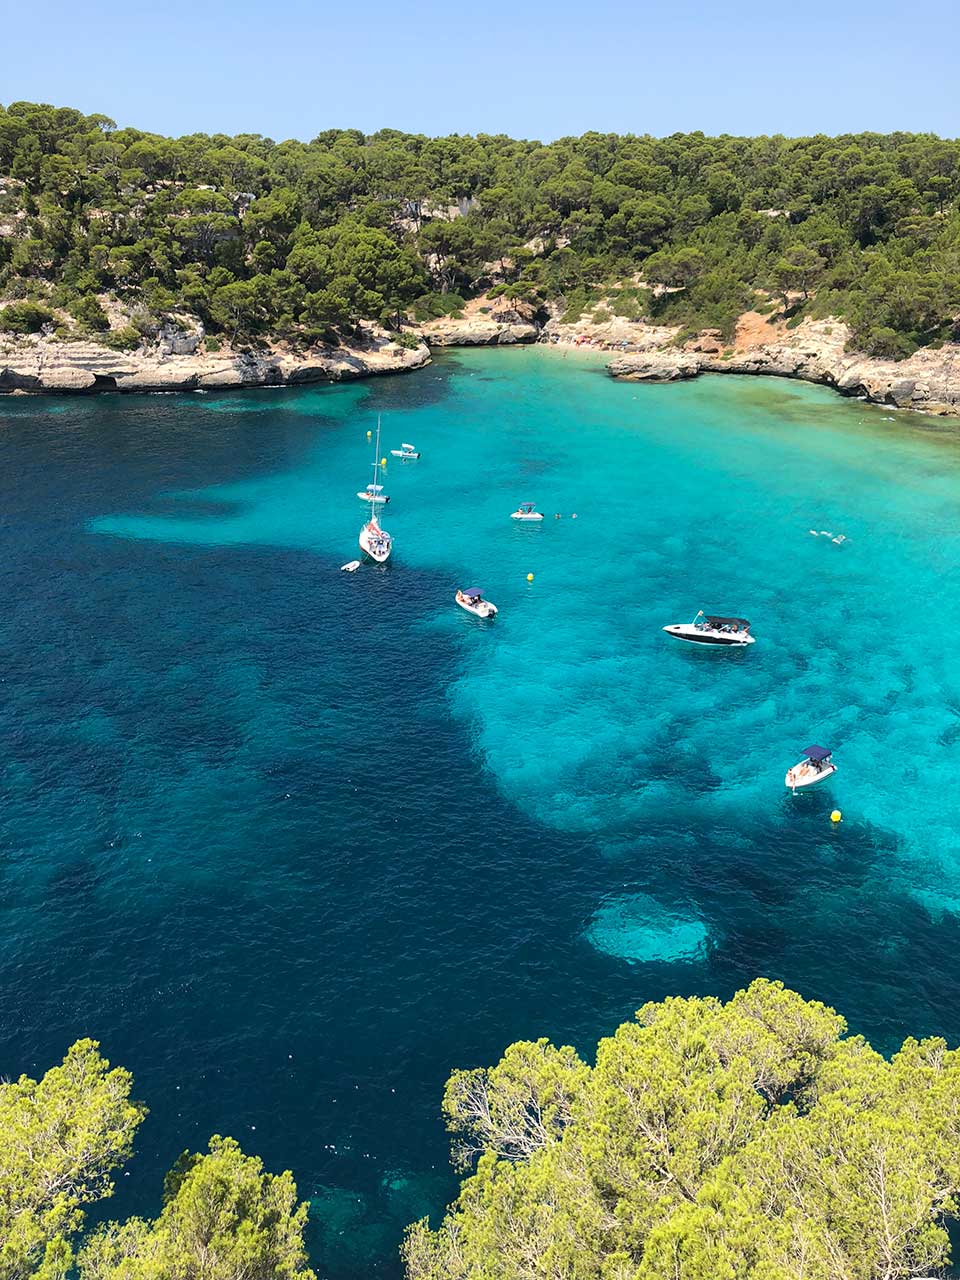 Cala Mitjana in Menorca, where PONS Shoes are handcrafted